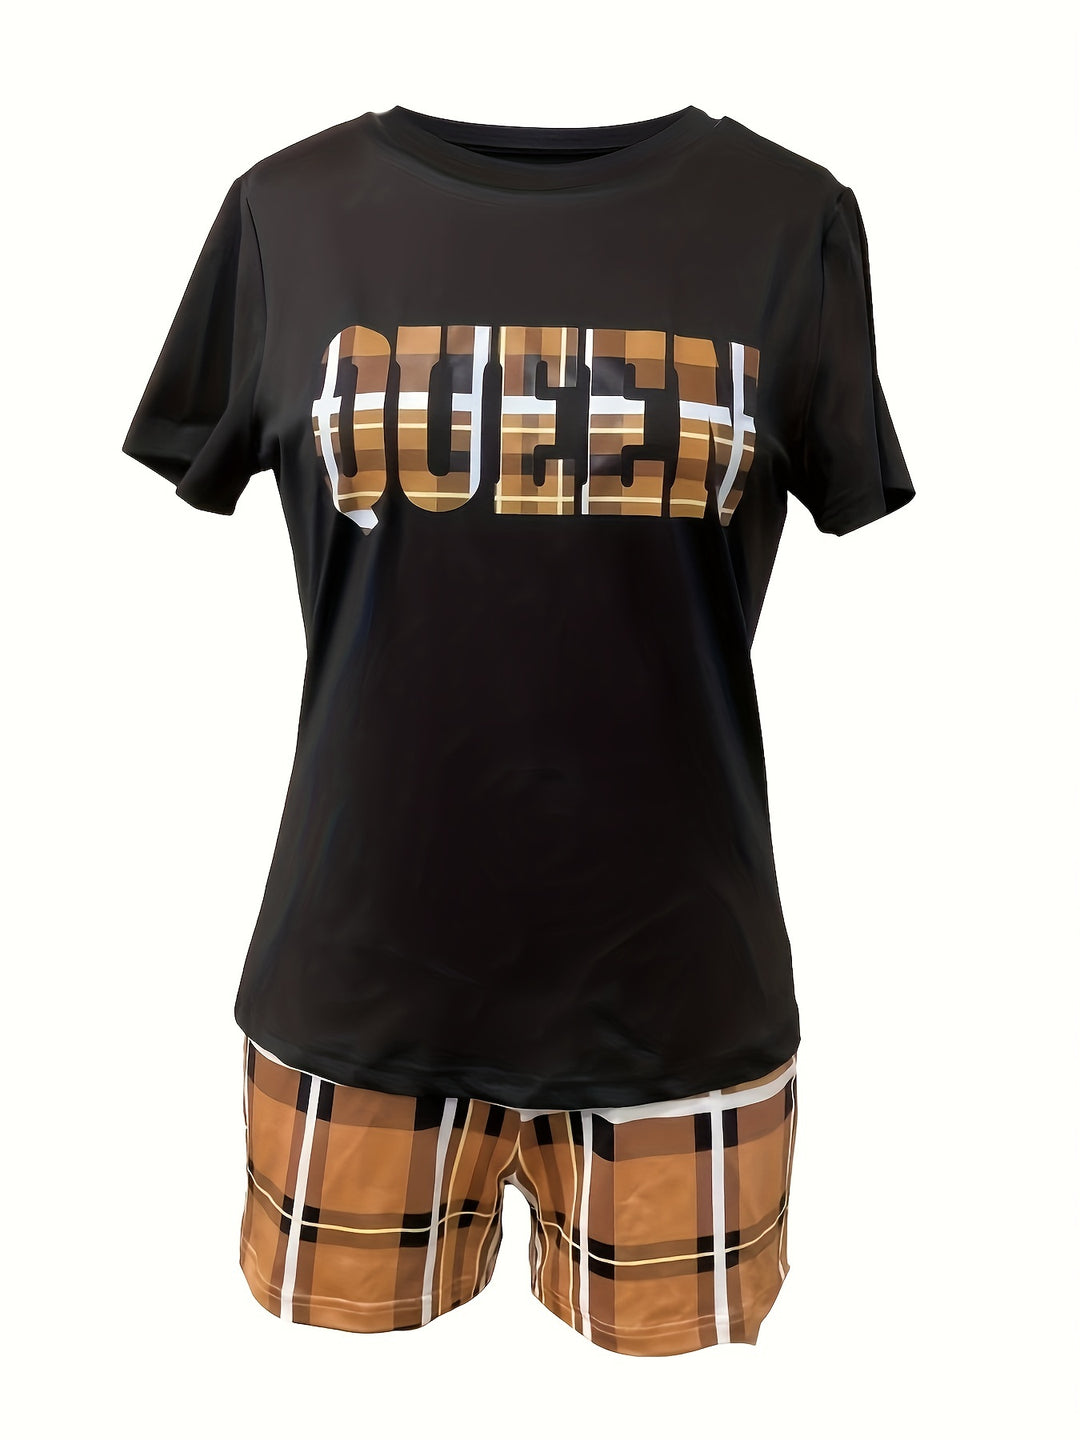 Queen Letter Print Short Sleeve Tee and Plaid Mini Shorts Outfits - Gen U Us Products